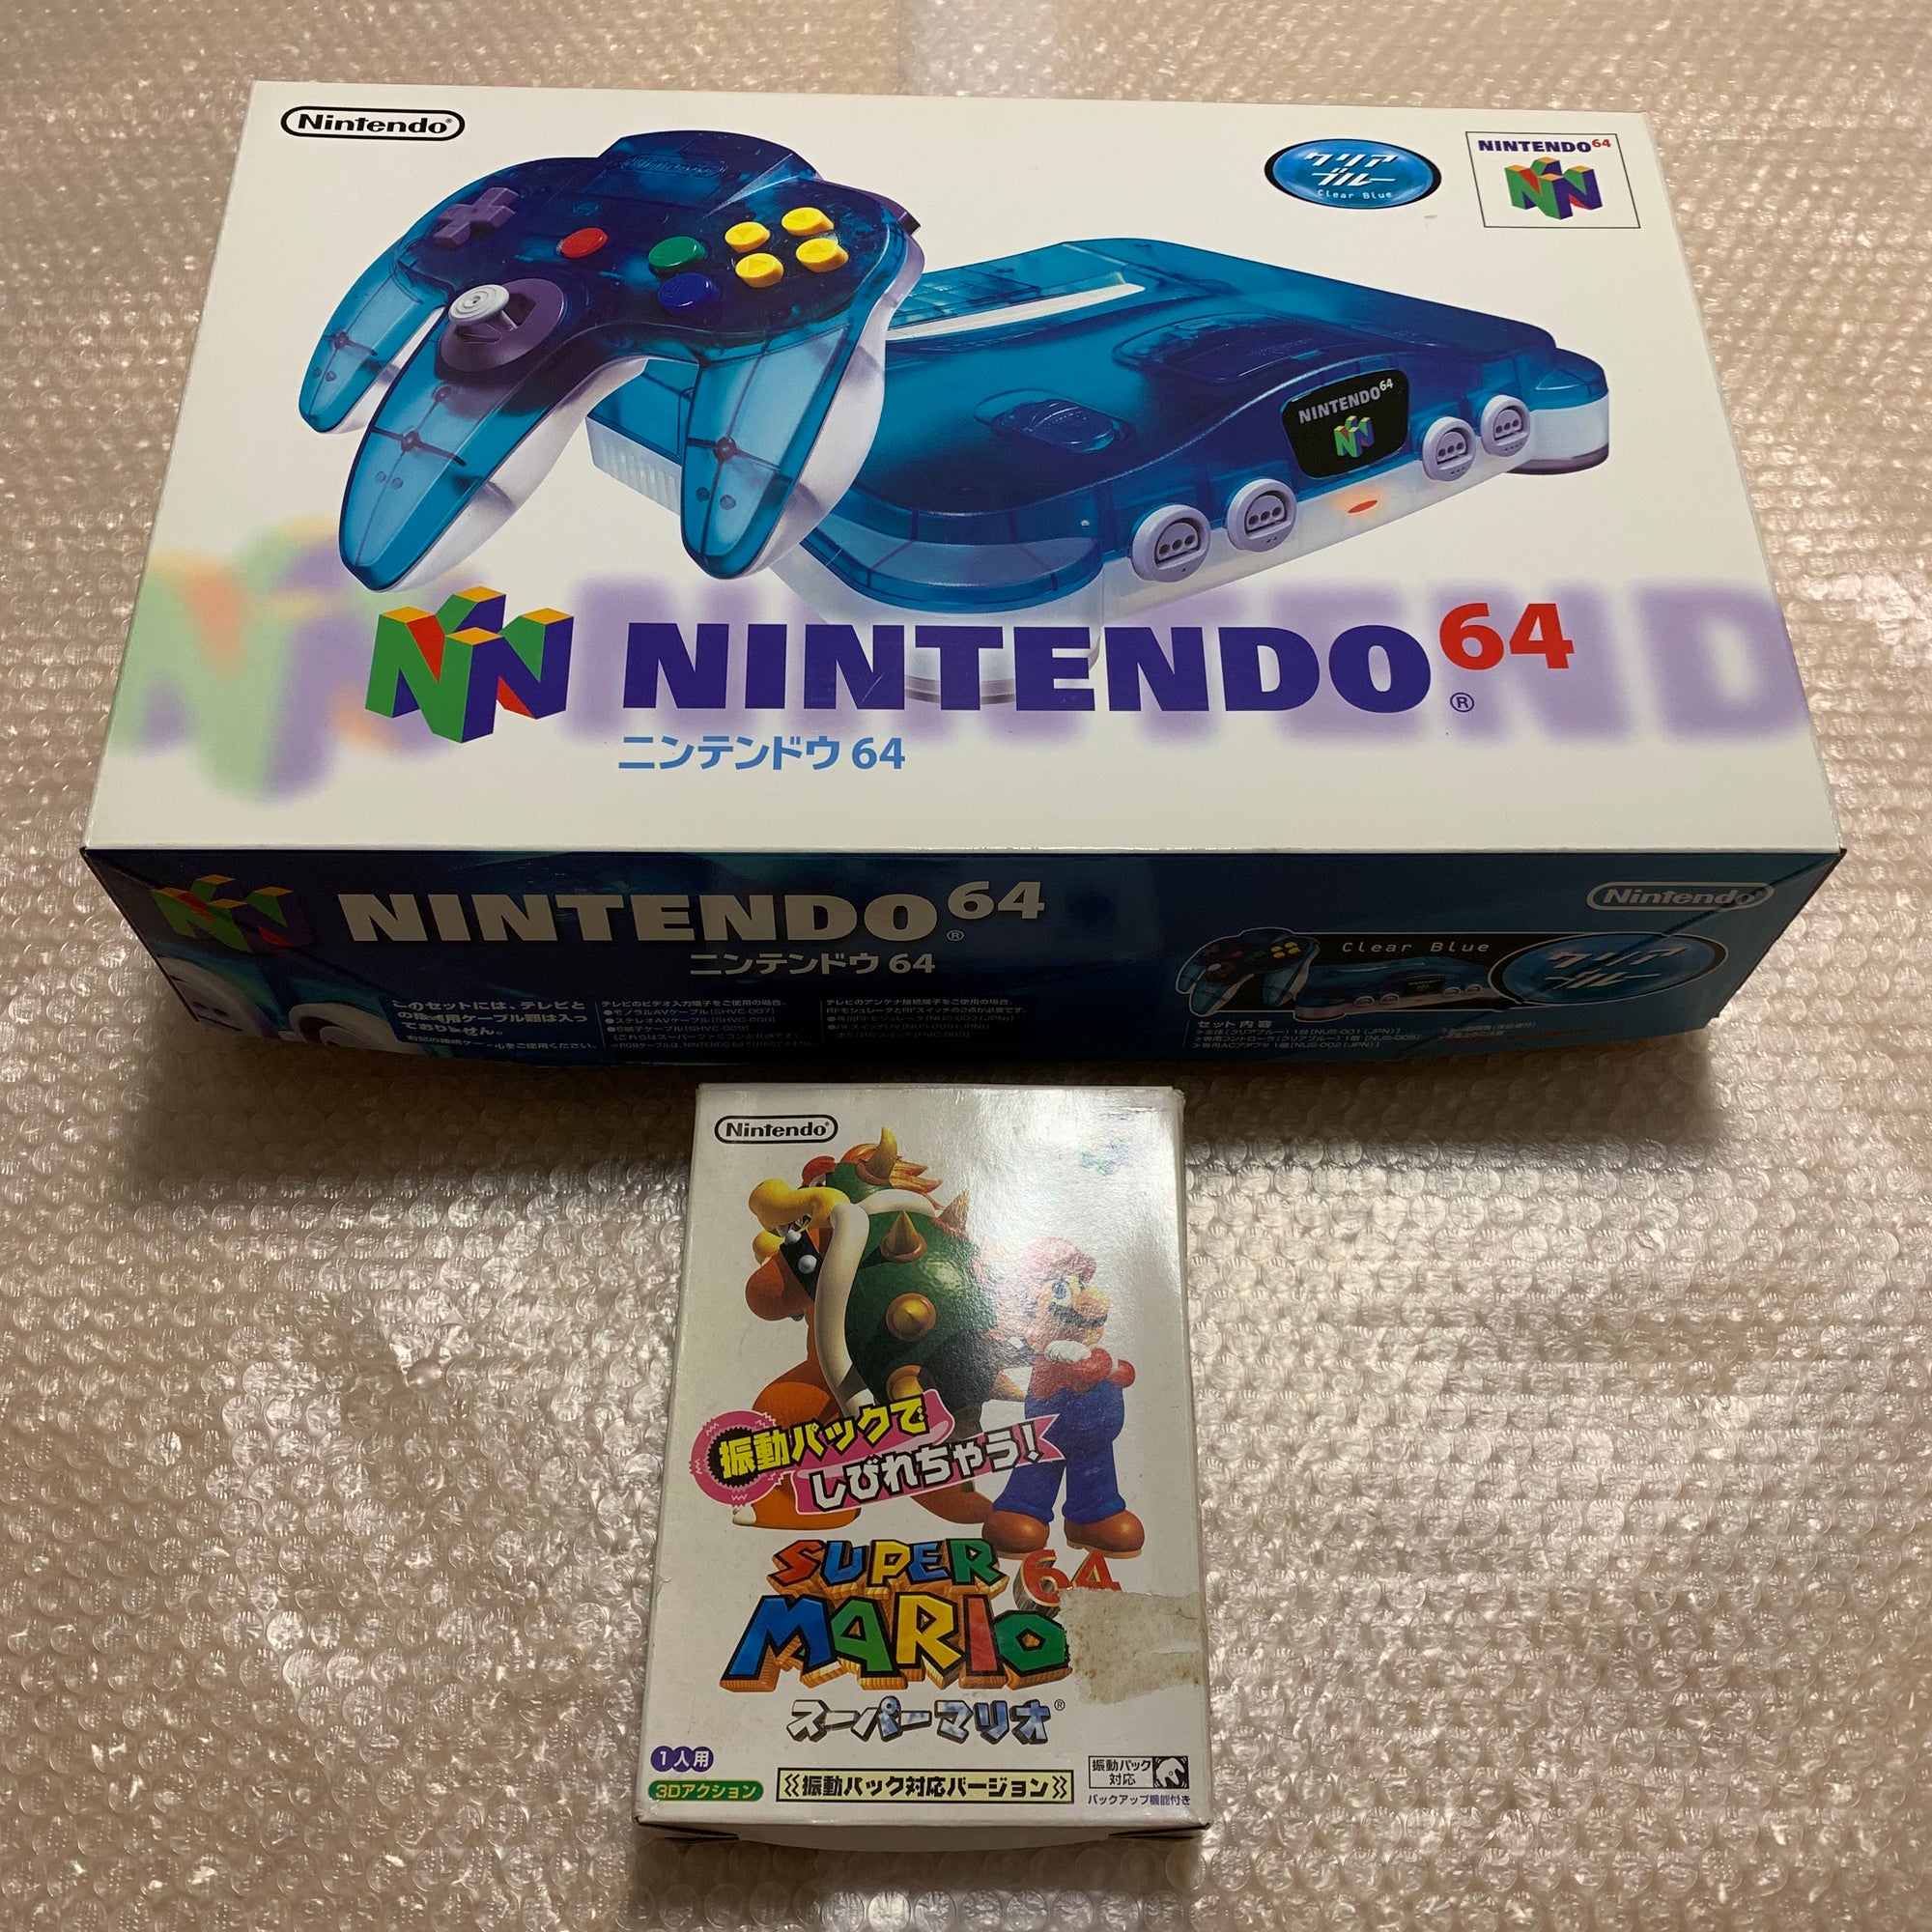 Clear blue Nintendo 64 in box set with ULTRA HDMI kit - compatible with JP and US games